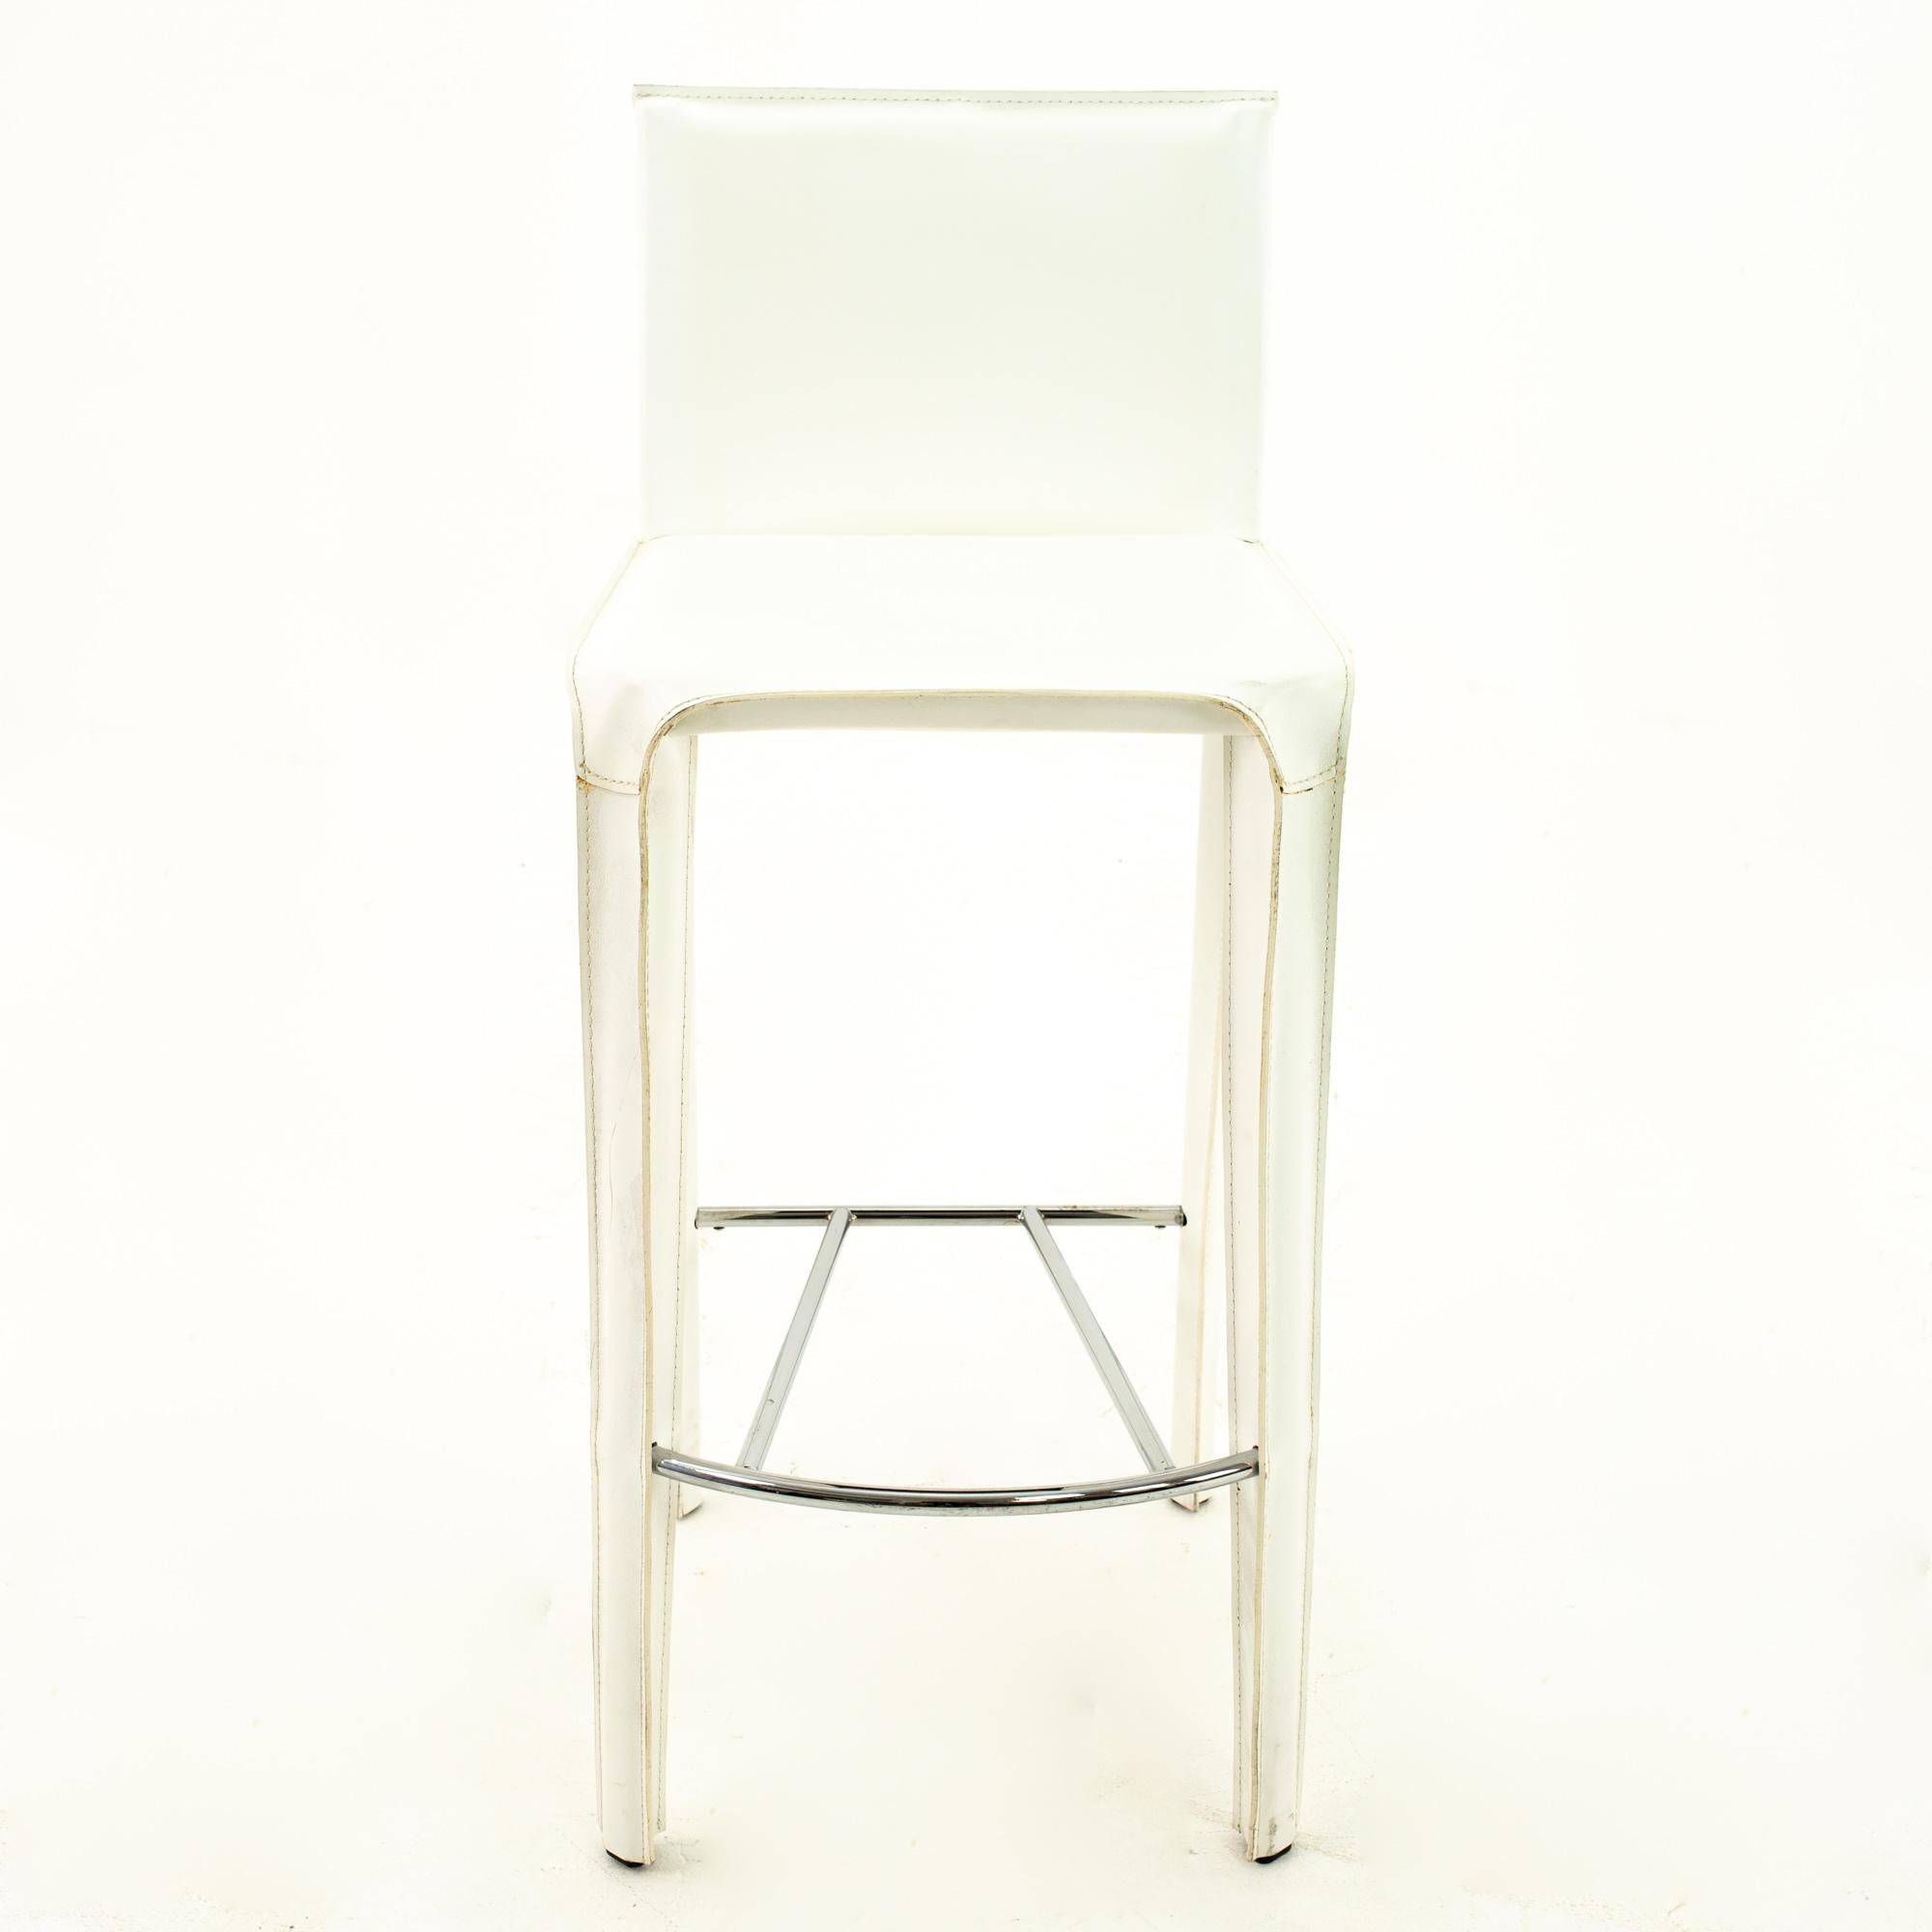 Late 20th Century Arper Mid Century White Leather Stools, Pair For Sale